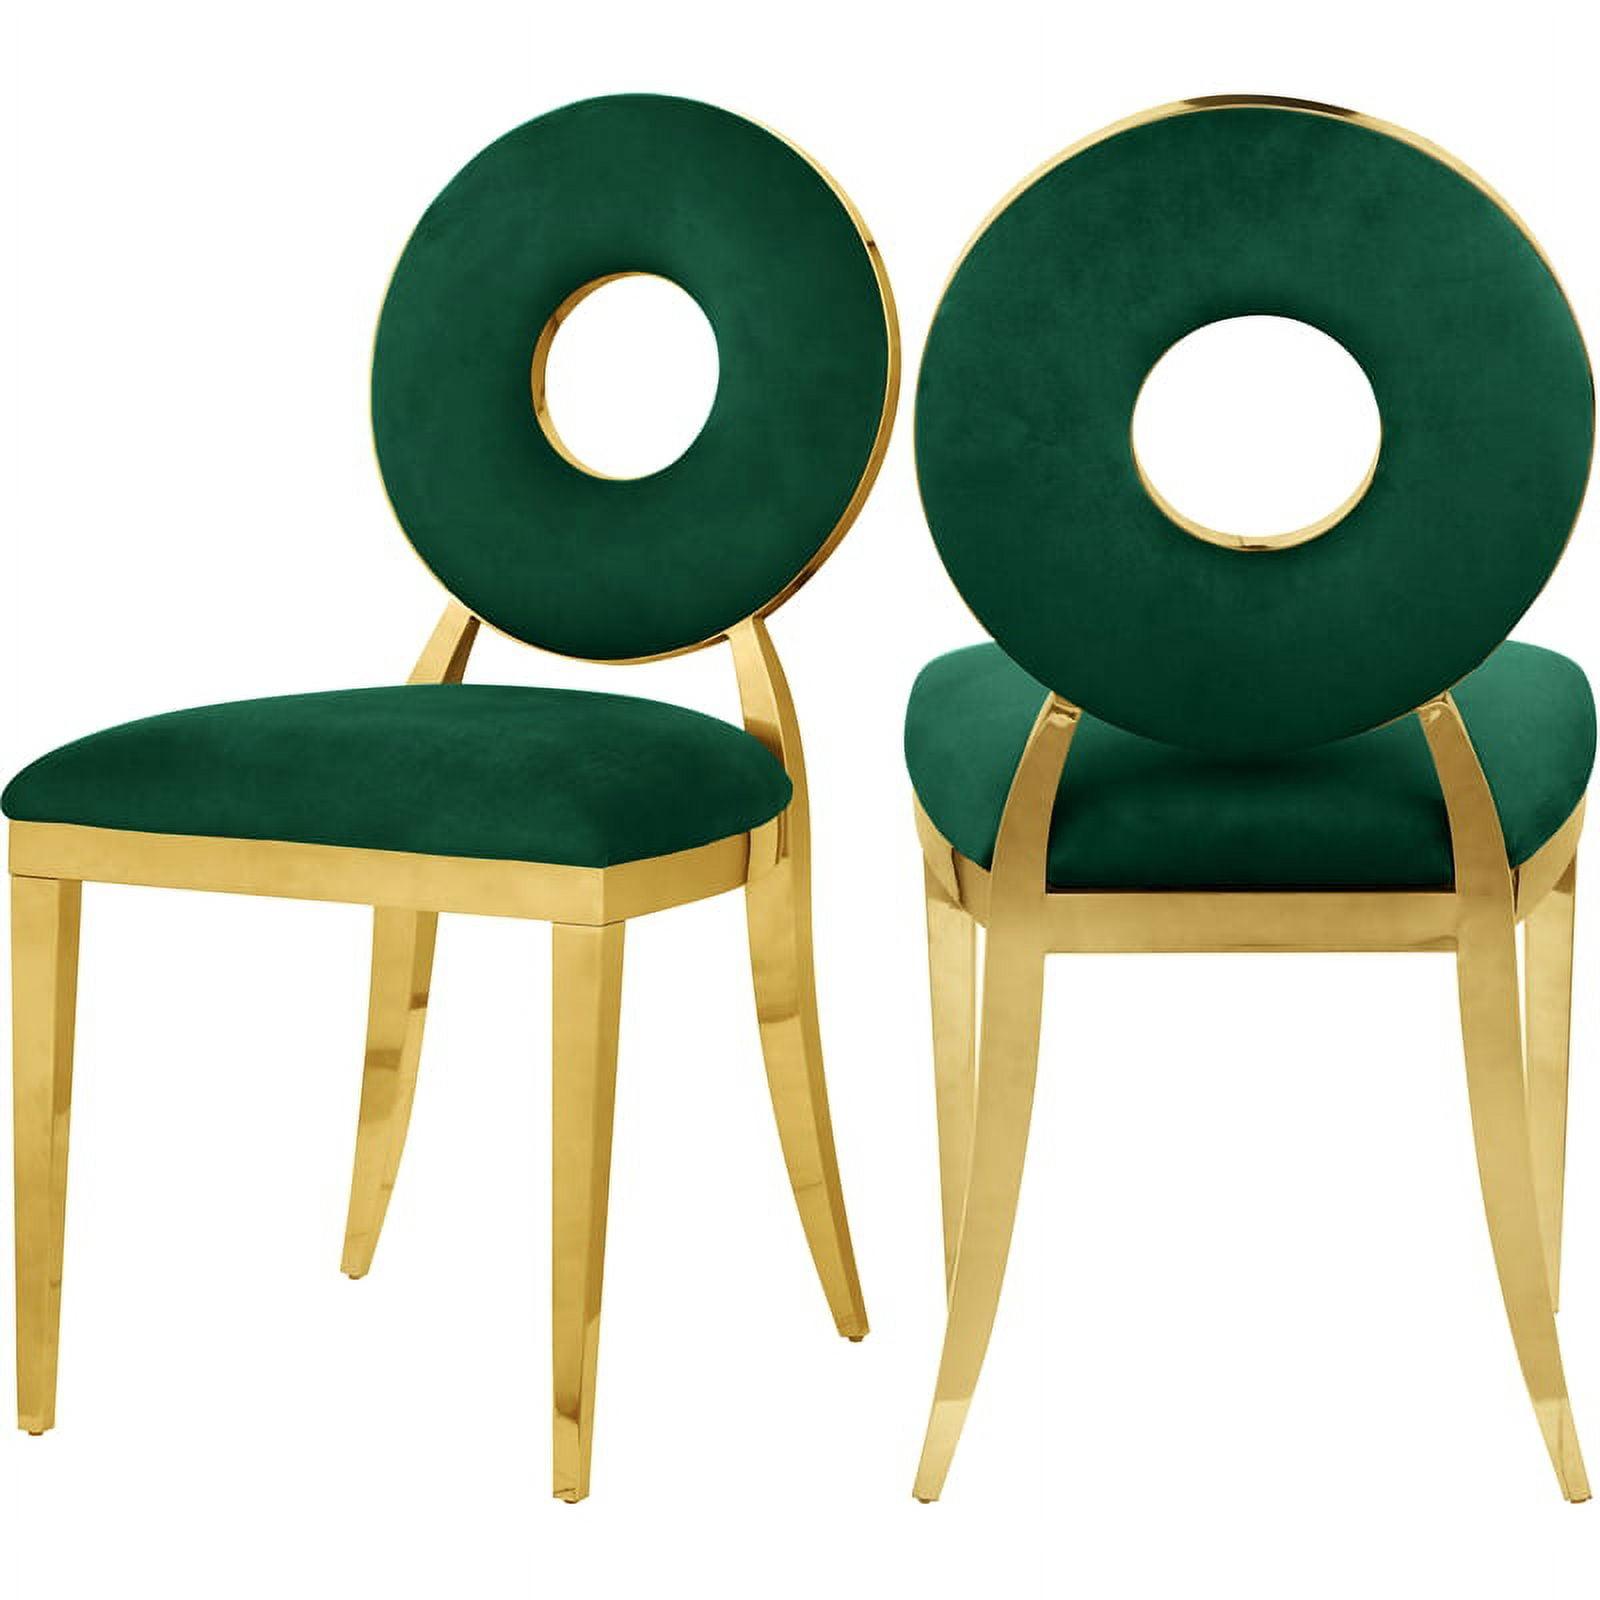 Chic Carousel Green Velvet Dining Chair with Gold Metal Frame